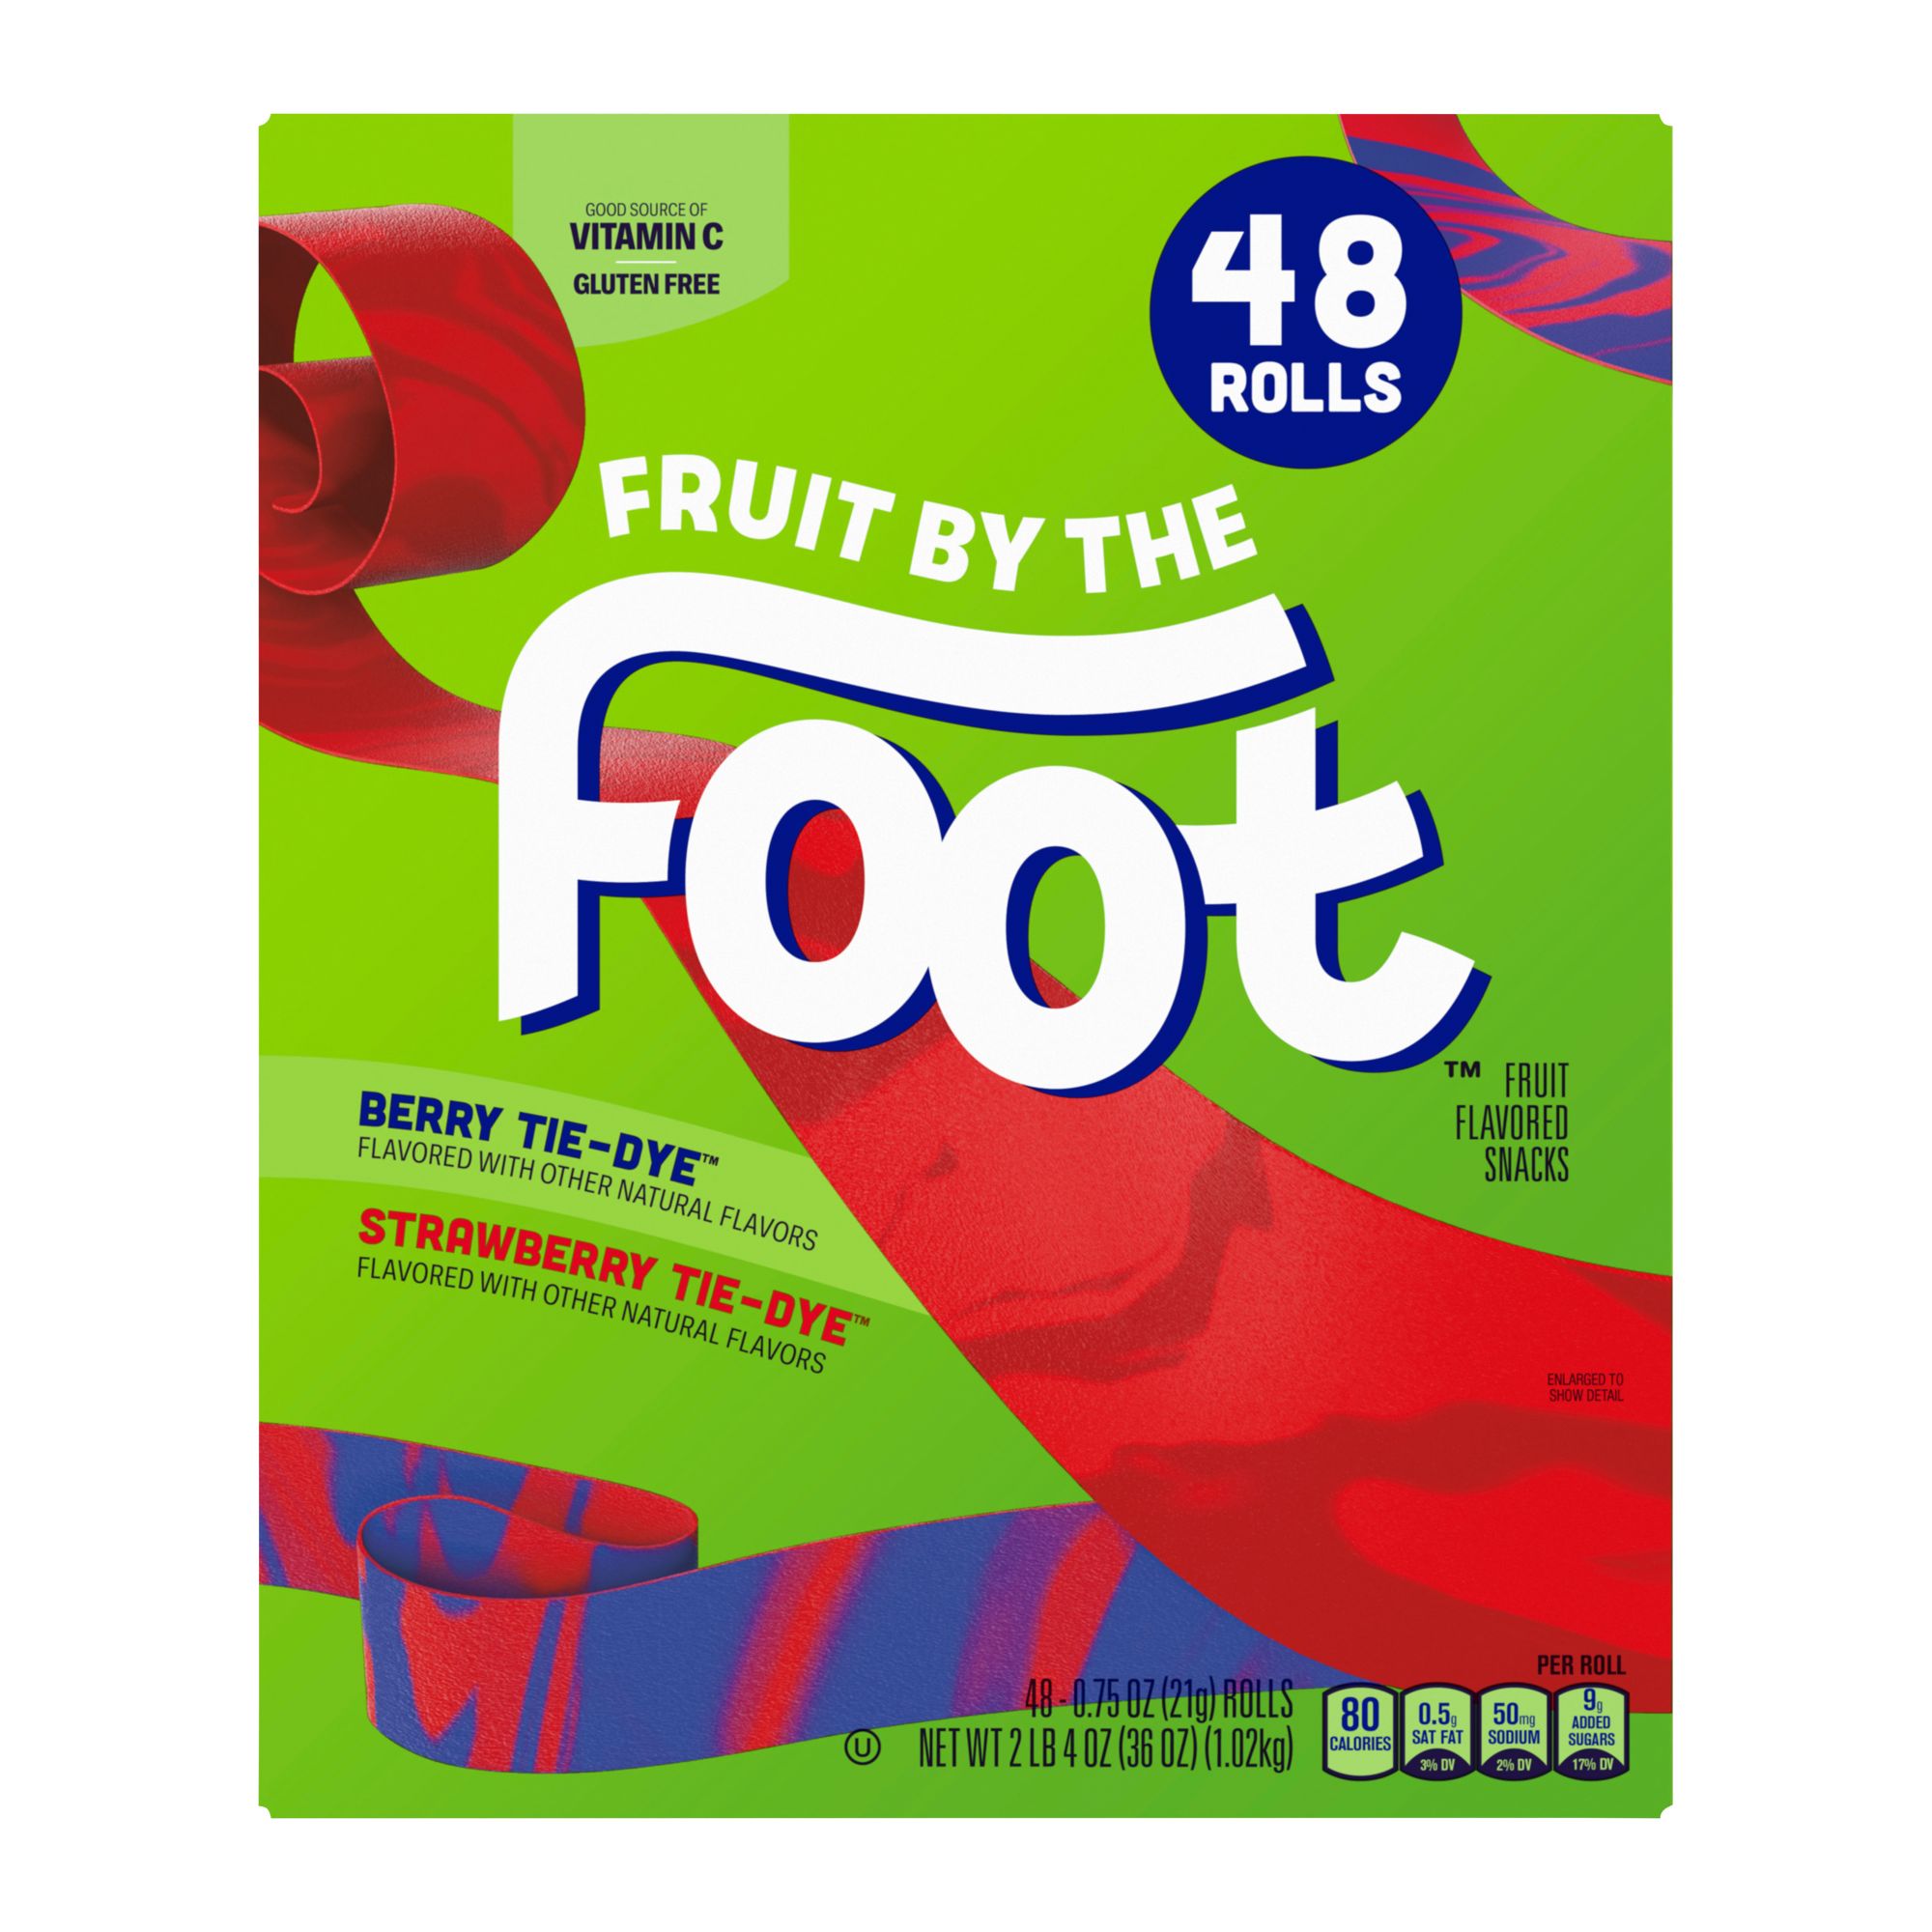 Fruit by the Foot Strawberry and Berry Tie-Dye Variety Pack